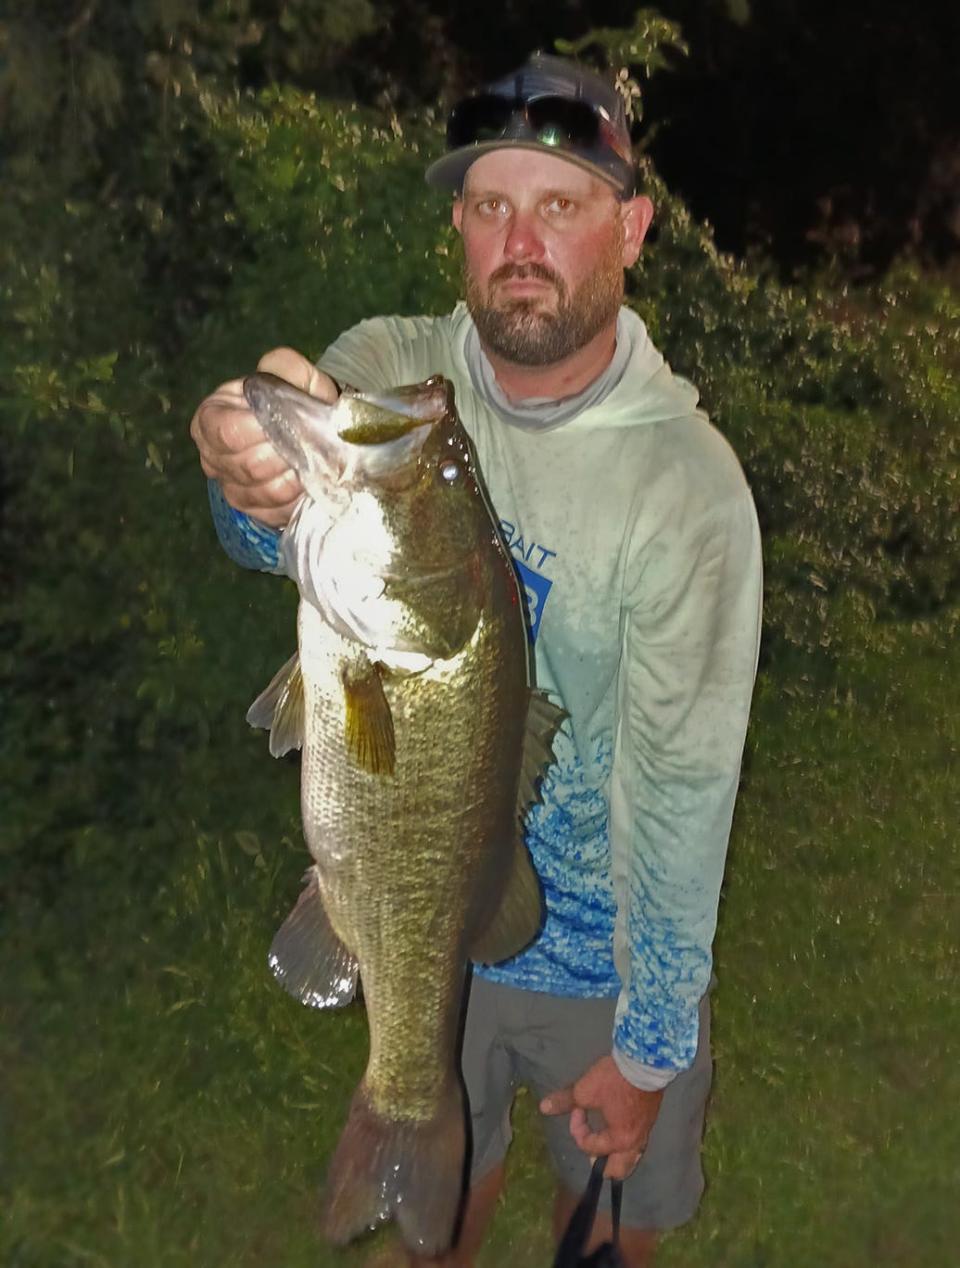 Shawn Rocket had big bass with a 7-pounder to help him and his partner Shea Arnold to a total weight of 19.90 pounds to win the Thursday Night Open Series tournament July 28 on the Winter Haven North Chain.